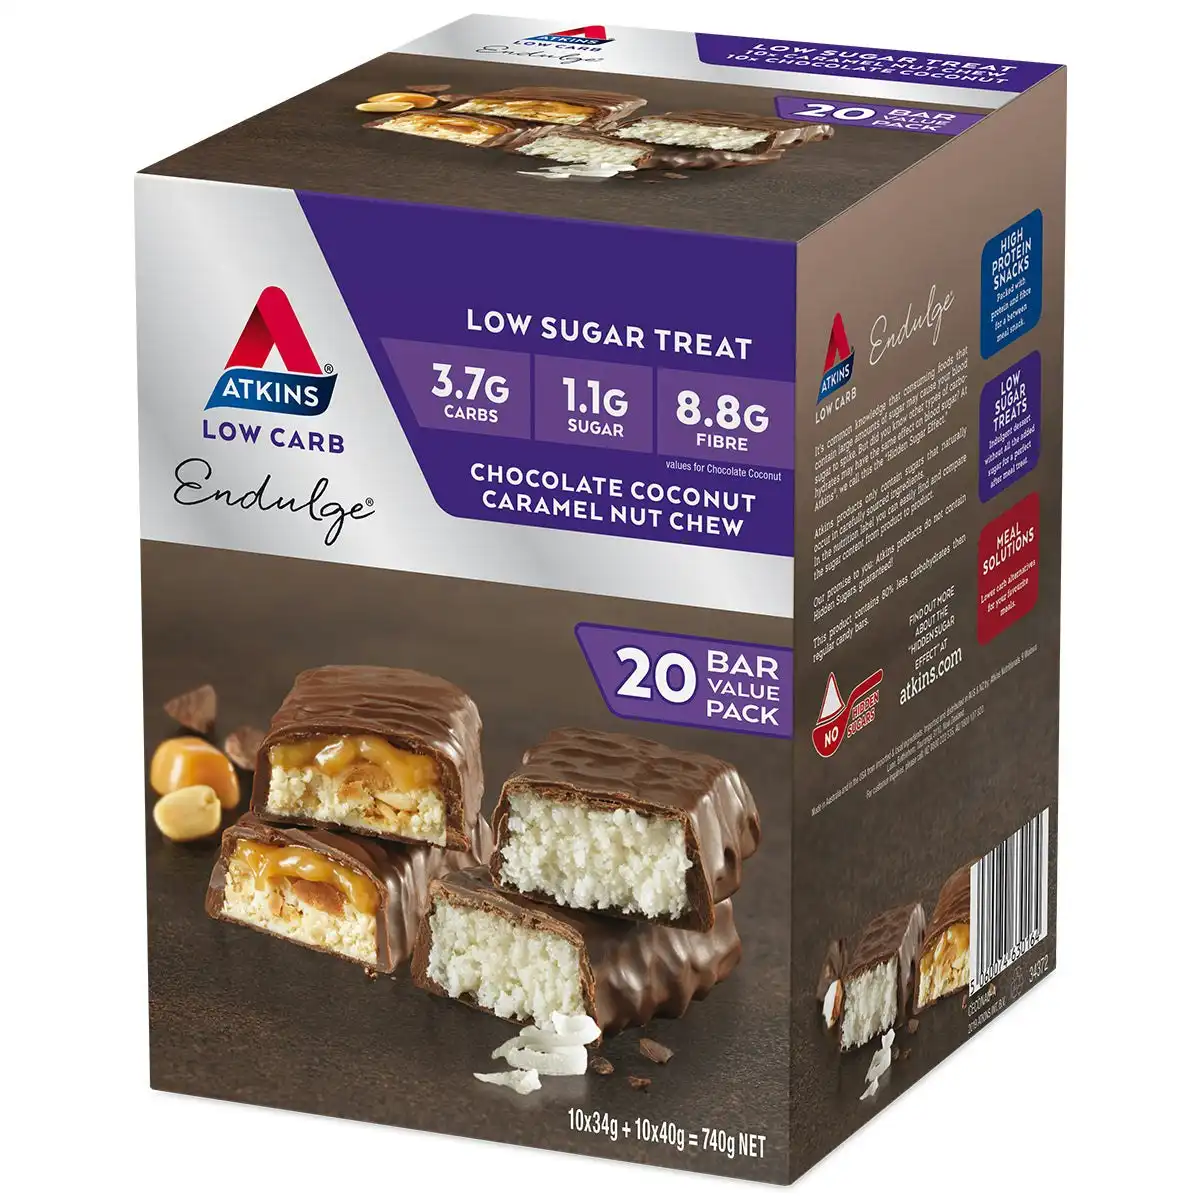 Atkins Low Carb Endulge Chocolate Coconut, Caramel Nut Chew Value Pack 20 Bars